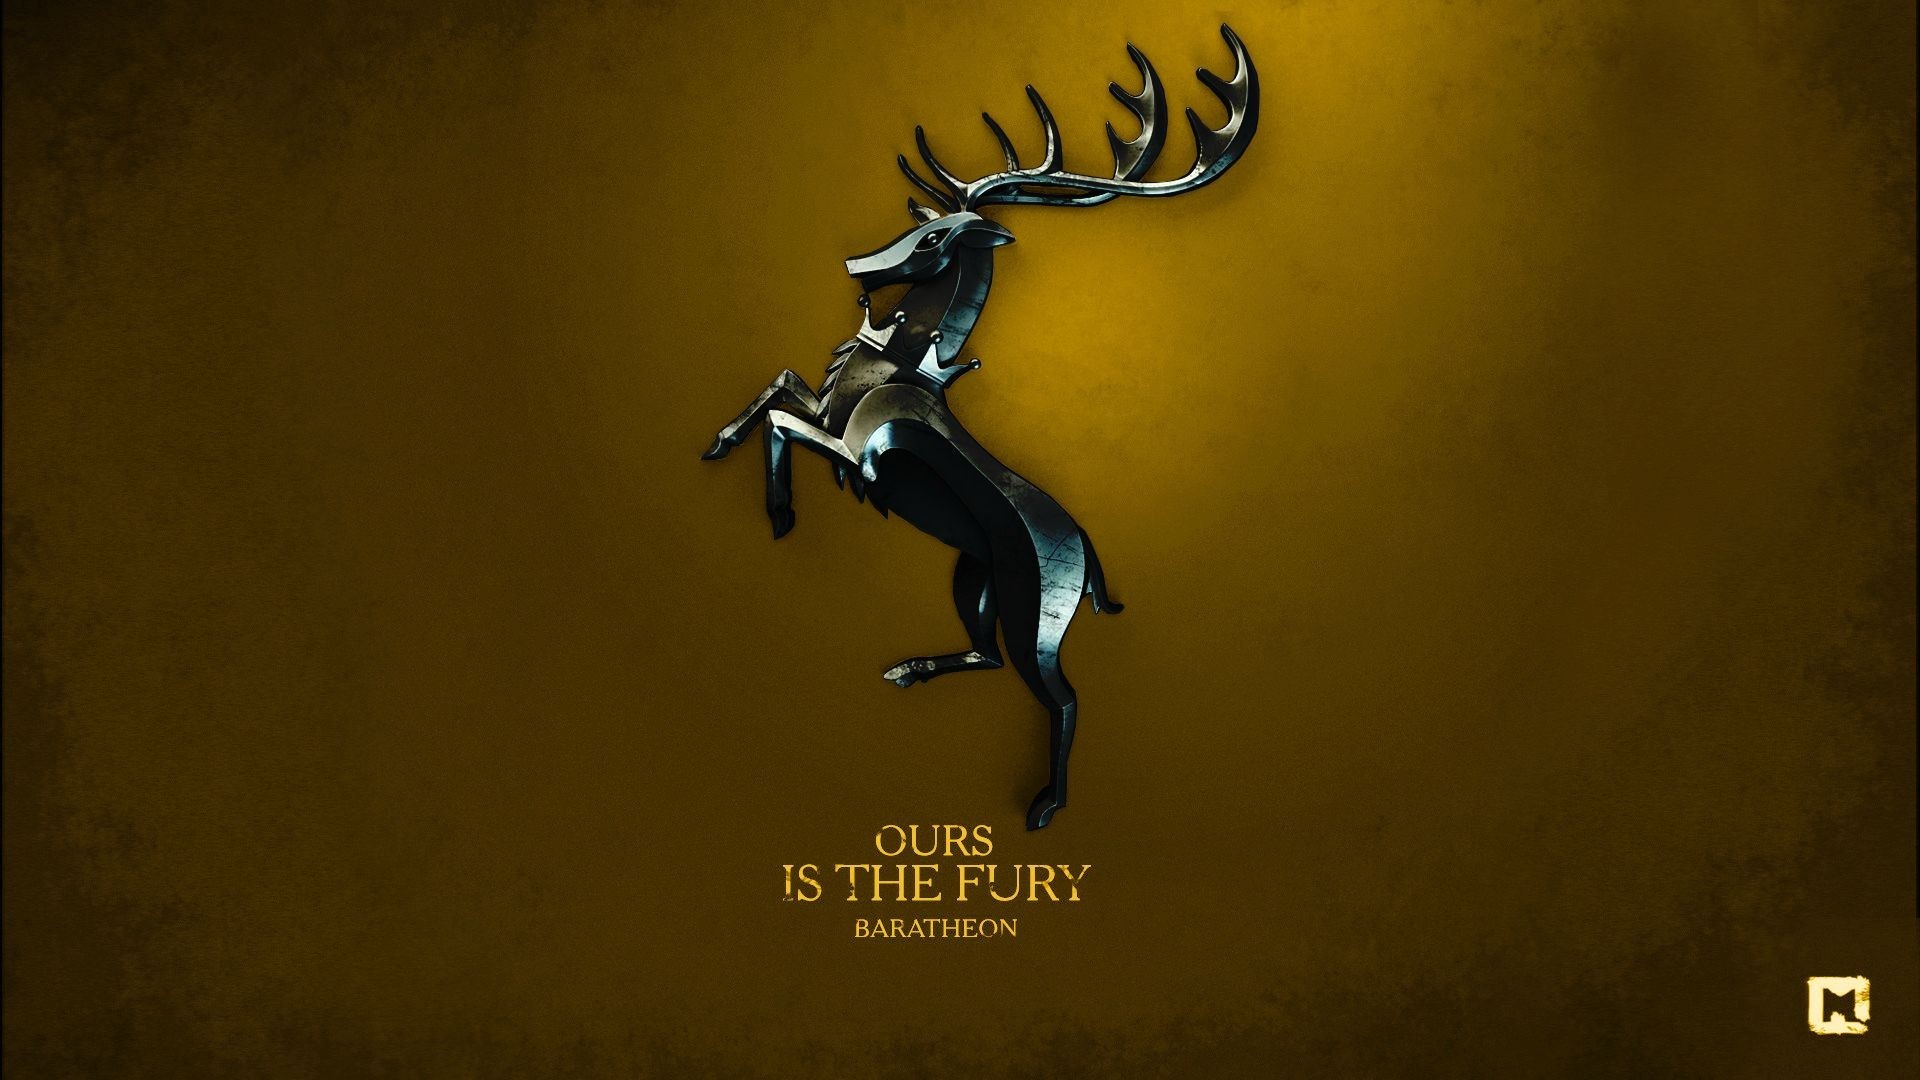 General 1920x1080 Game of Thrones A Song of Ice and Fire digital art House Baratheon sigils TV series